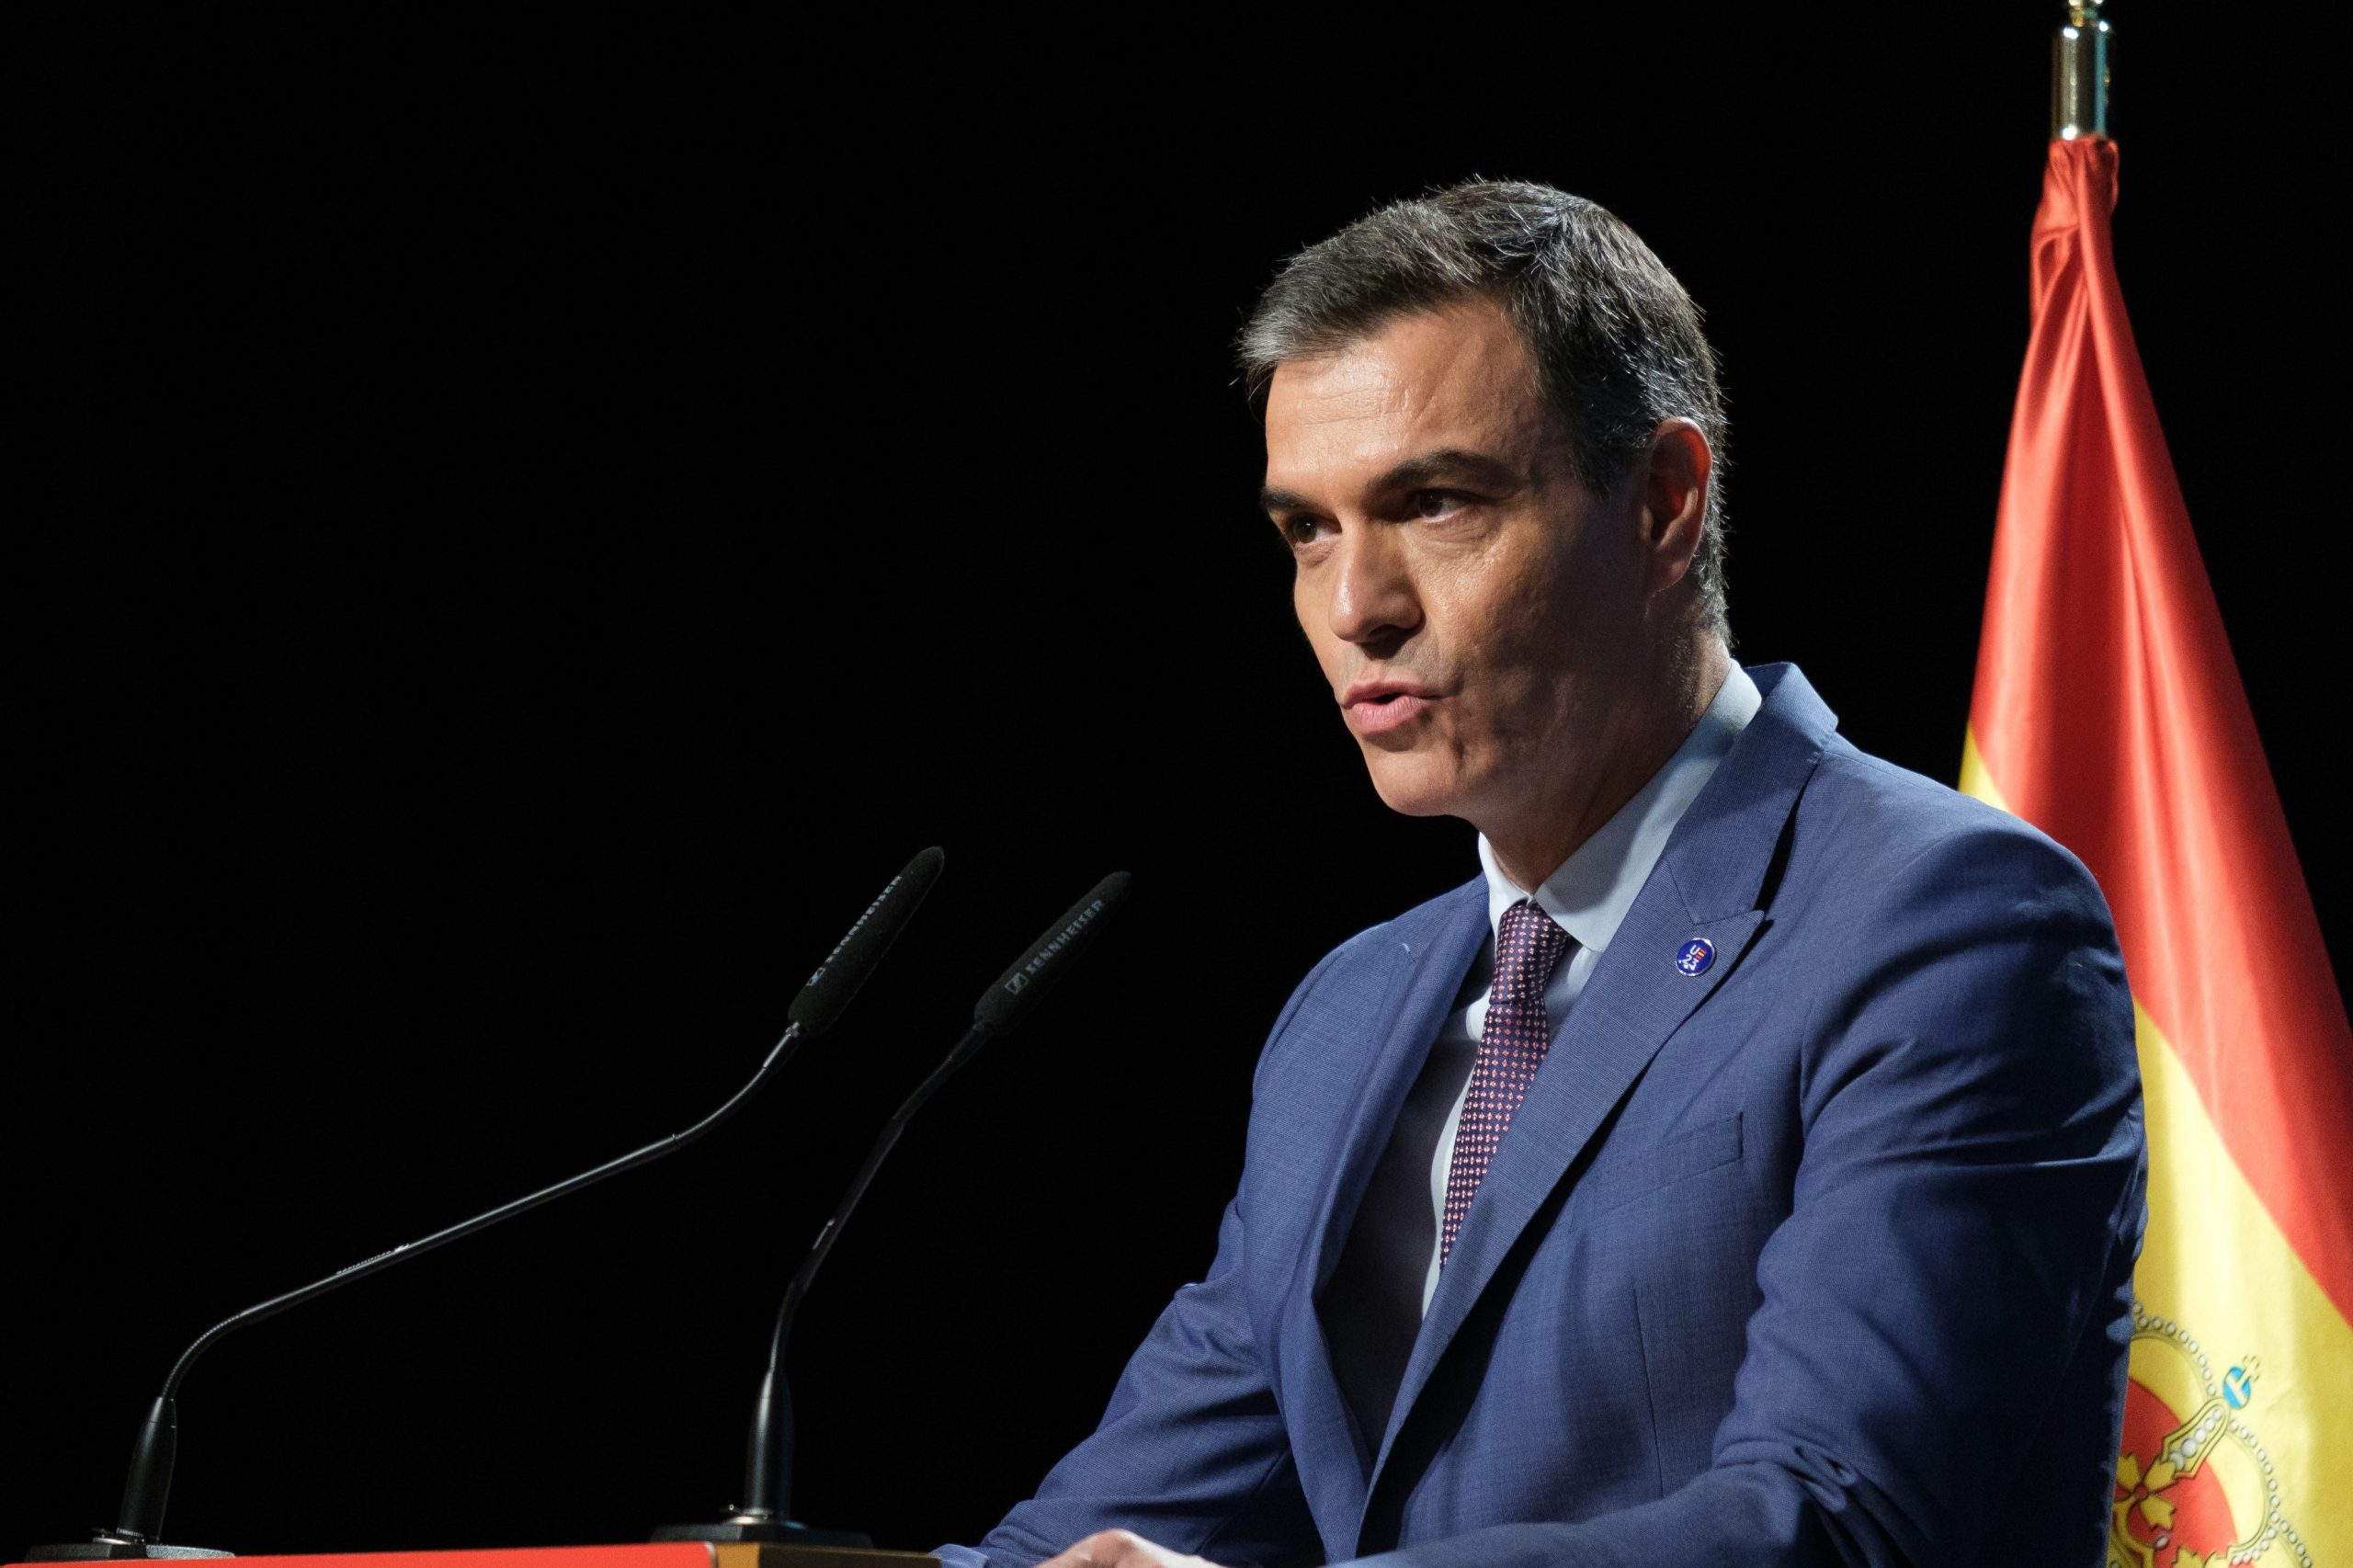 Spain set to finally have a government as Pedro Sanchez secures 179 votes ahead of investiture vote next week